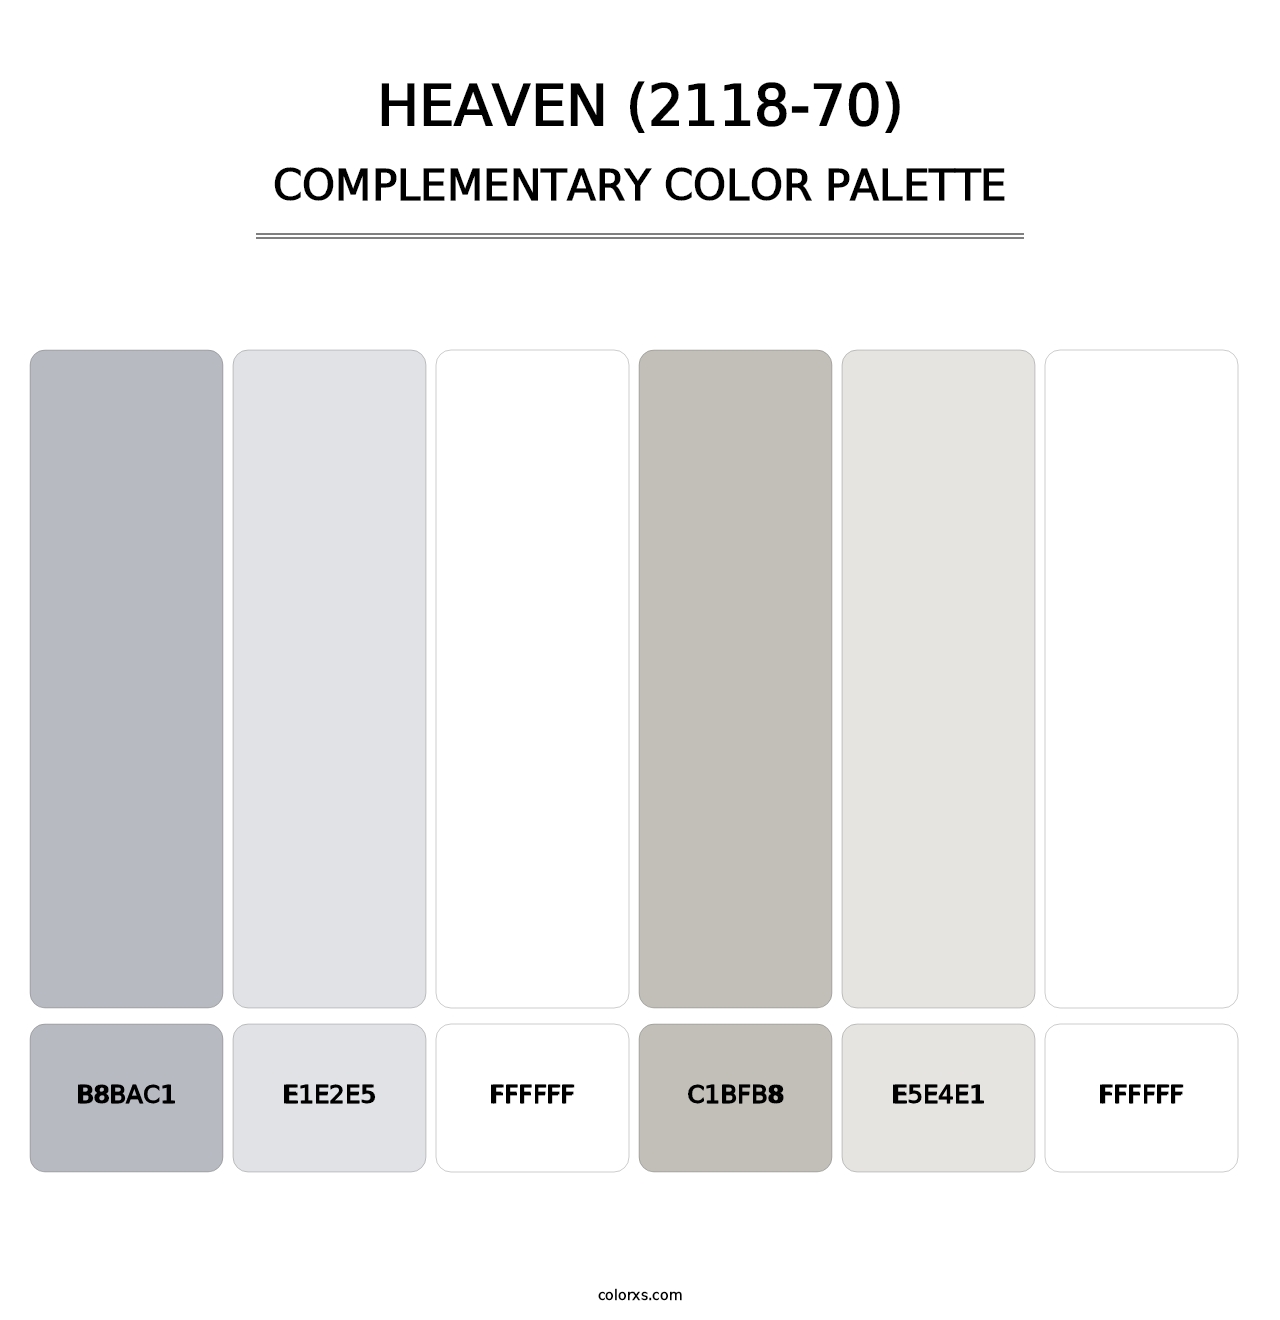 Heaven (2118-70) - Complementary Color Palette